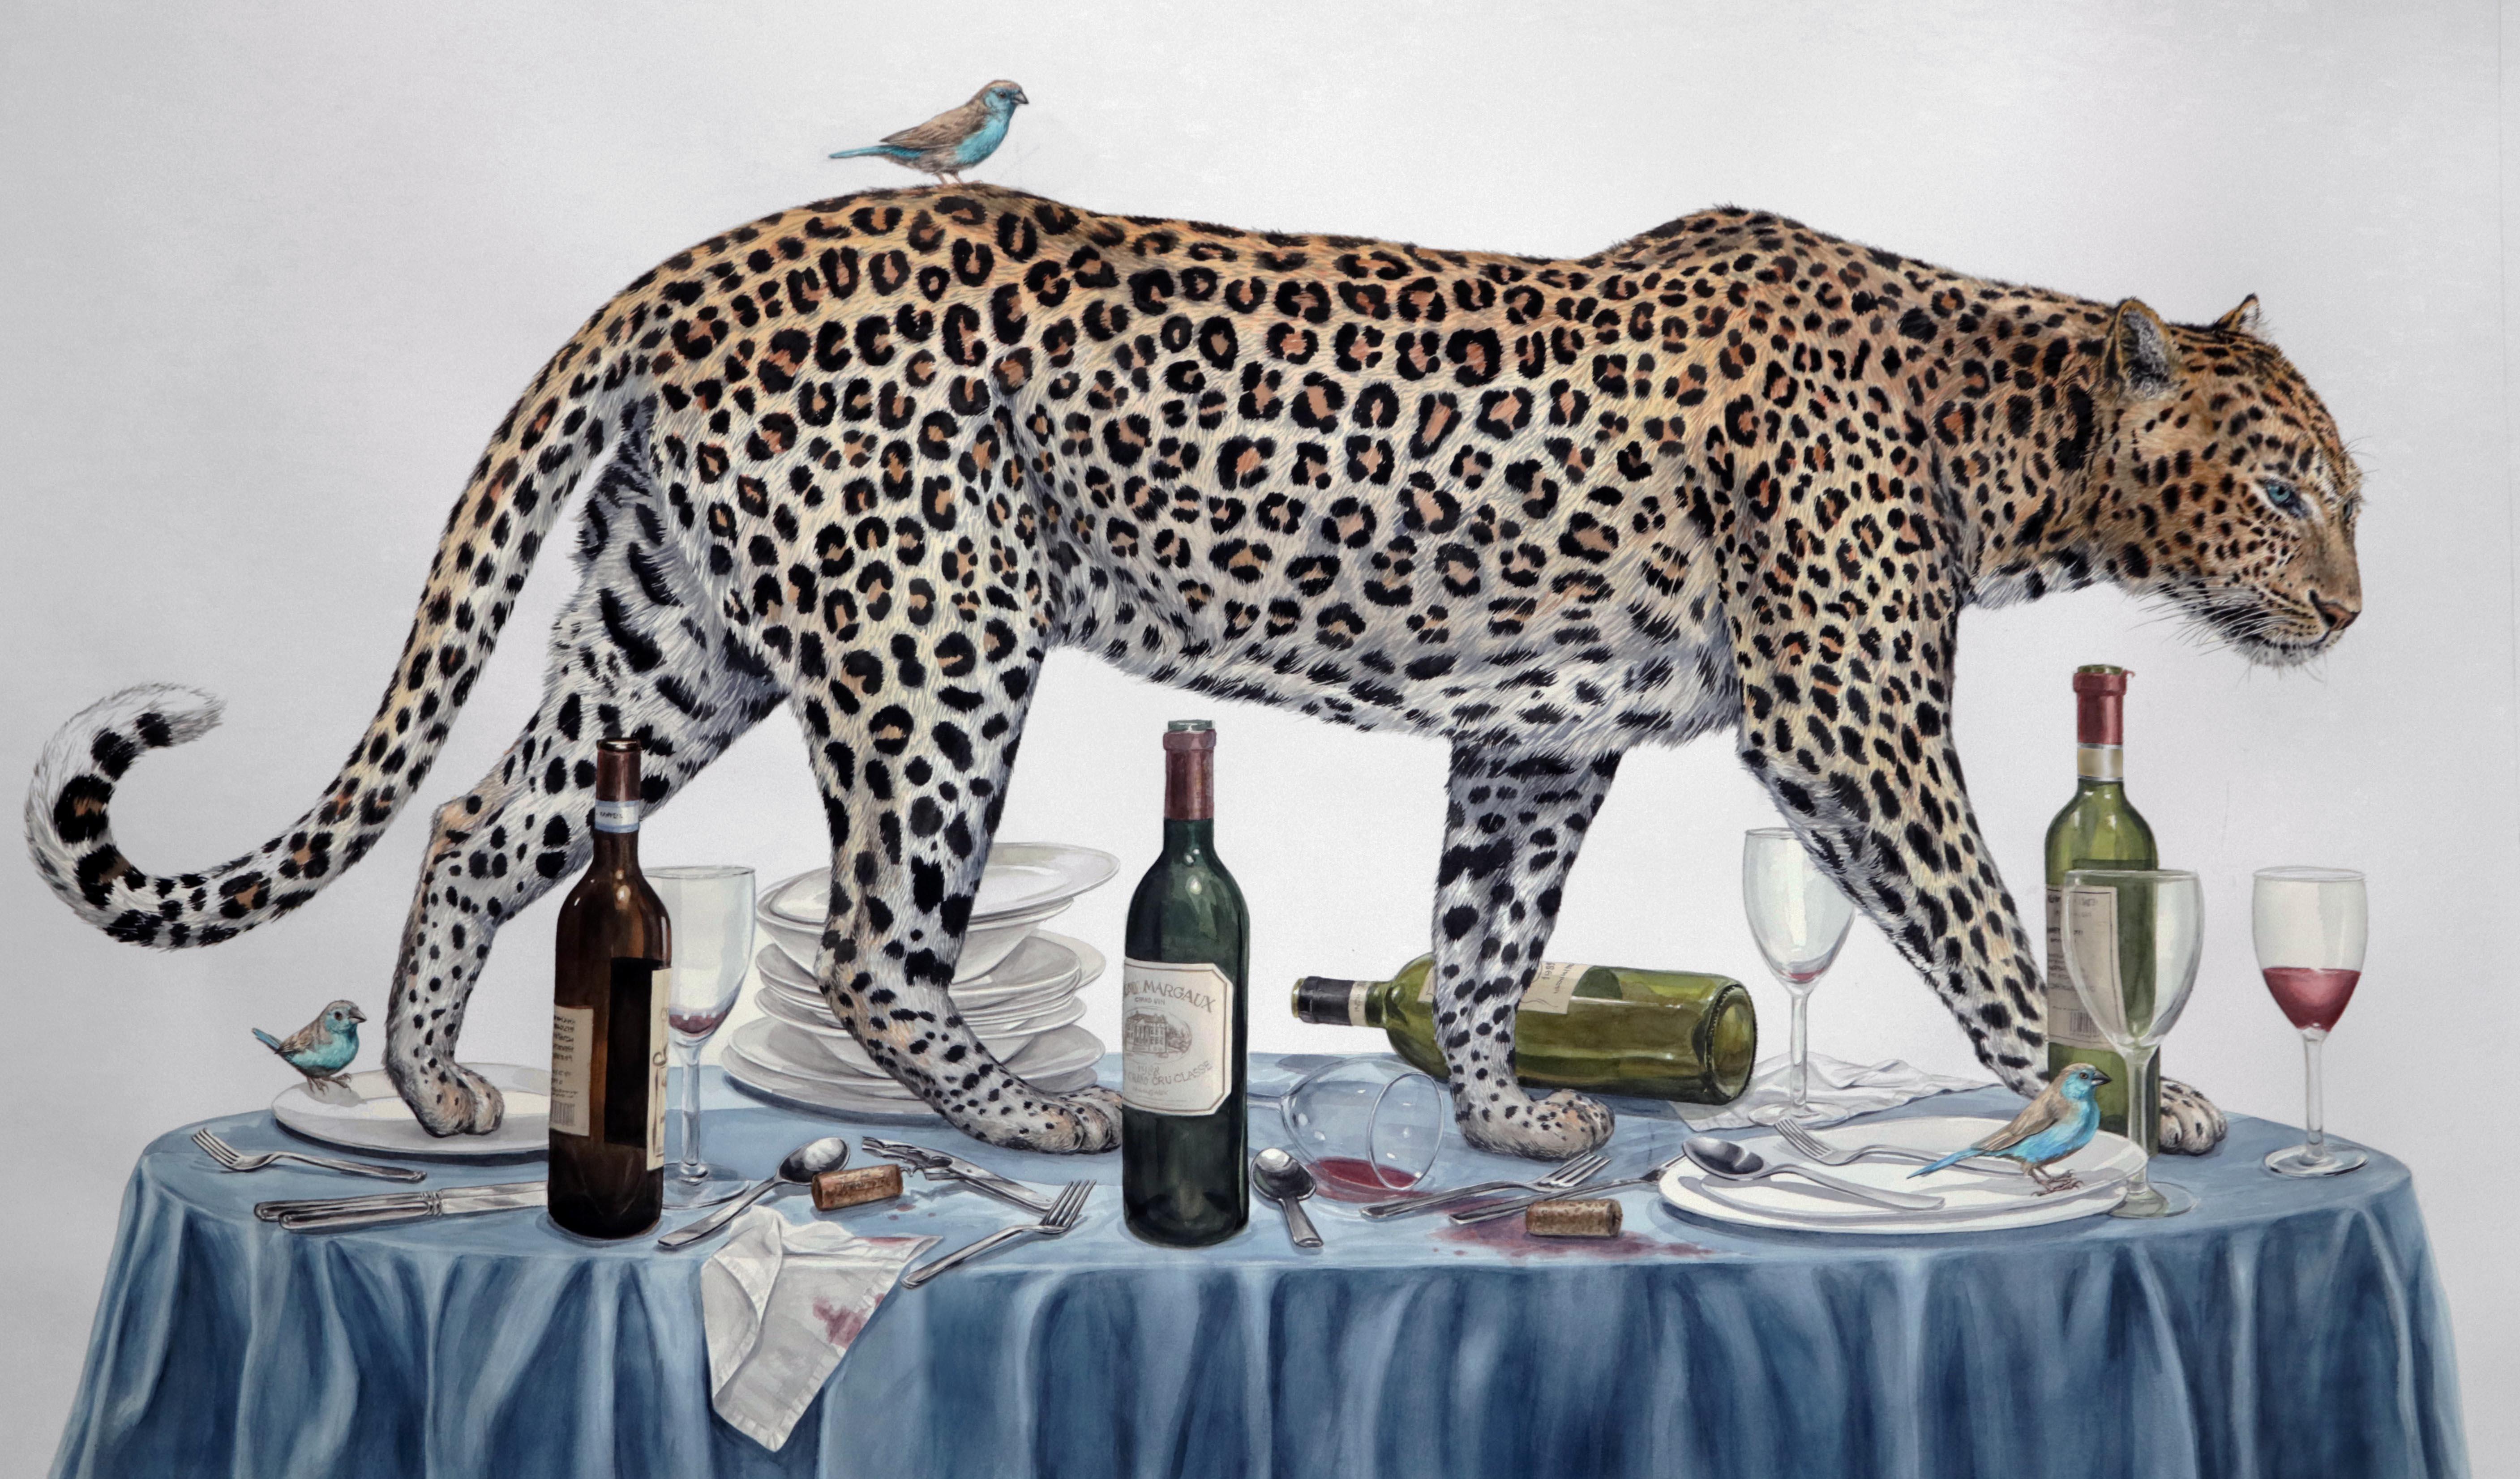 Thomas Broadbent Animal Art - "The Dinner Party" large scale watercolor on paper- jaguar w/ bluebirds